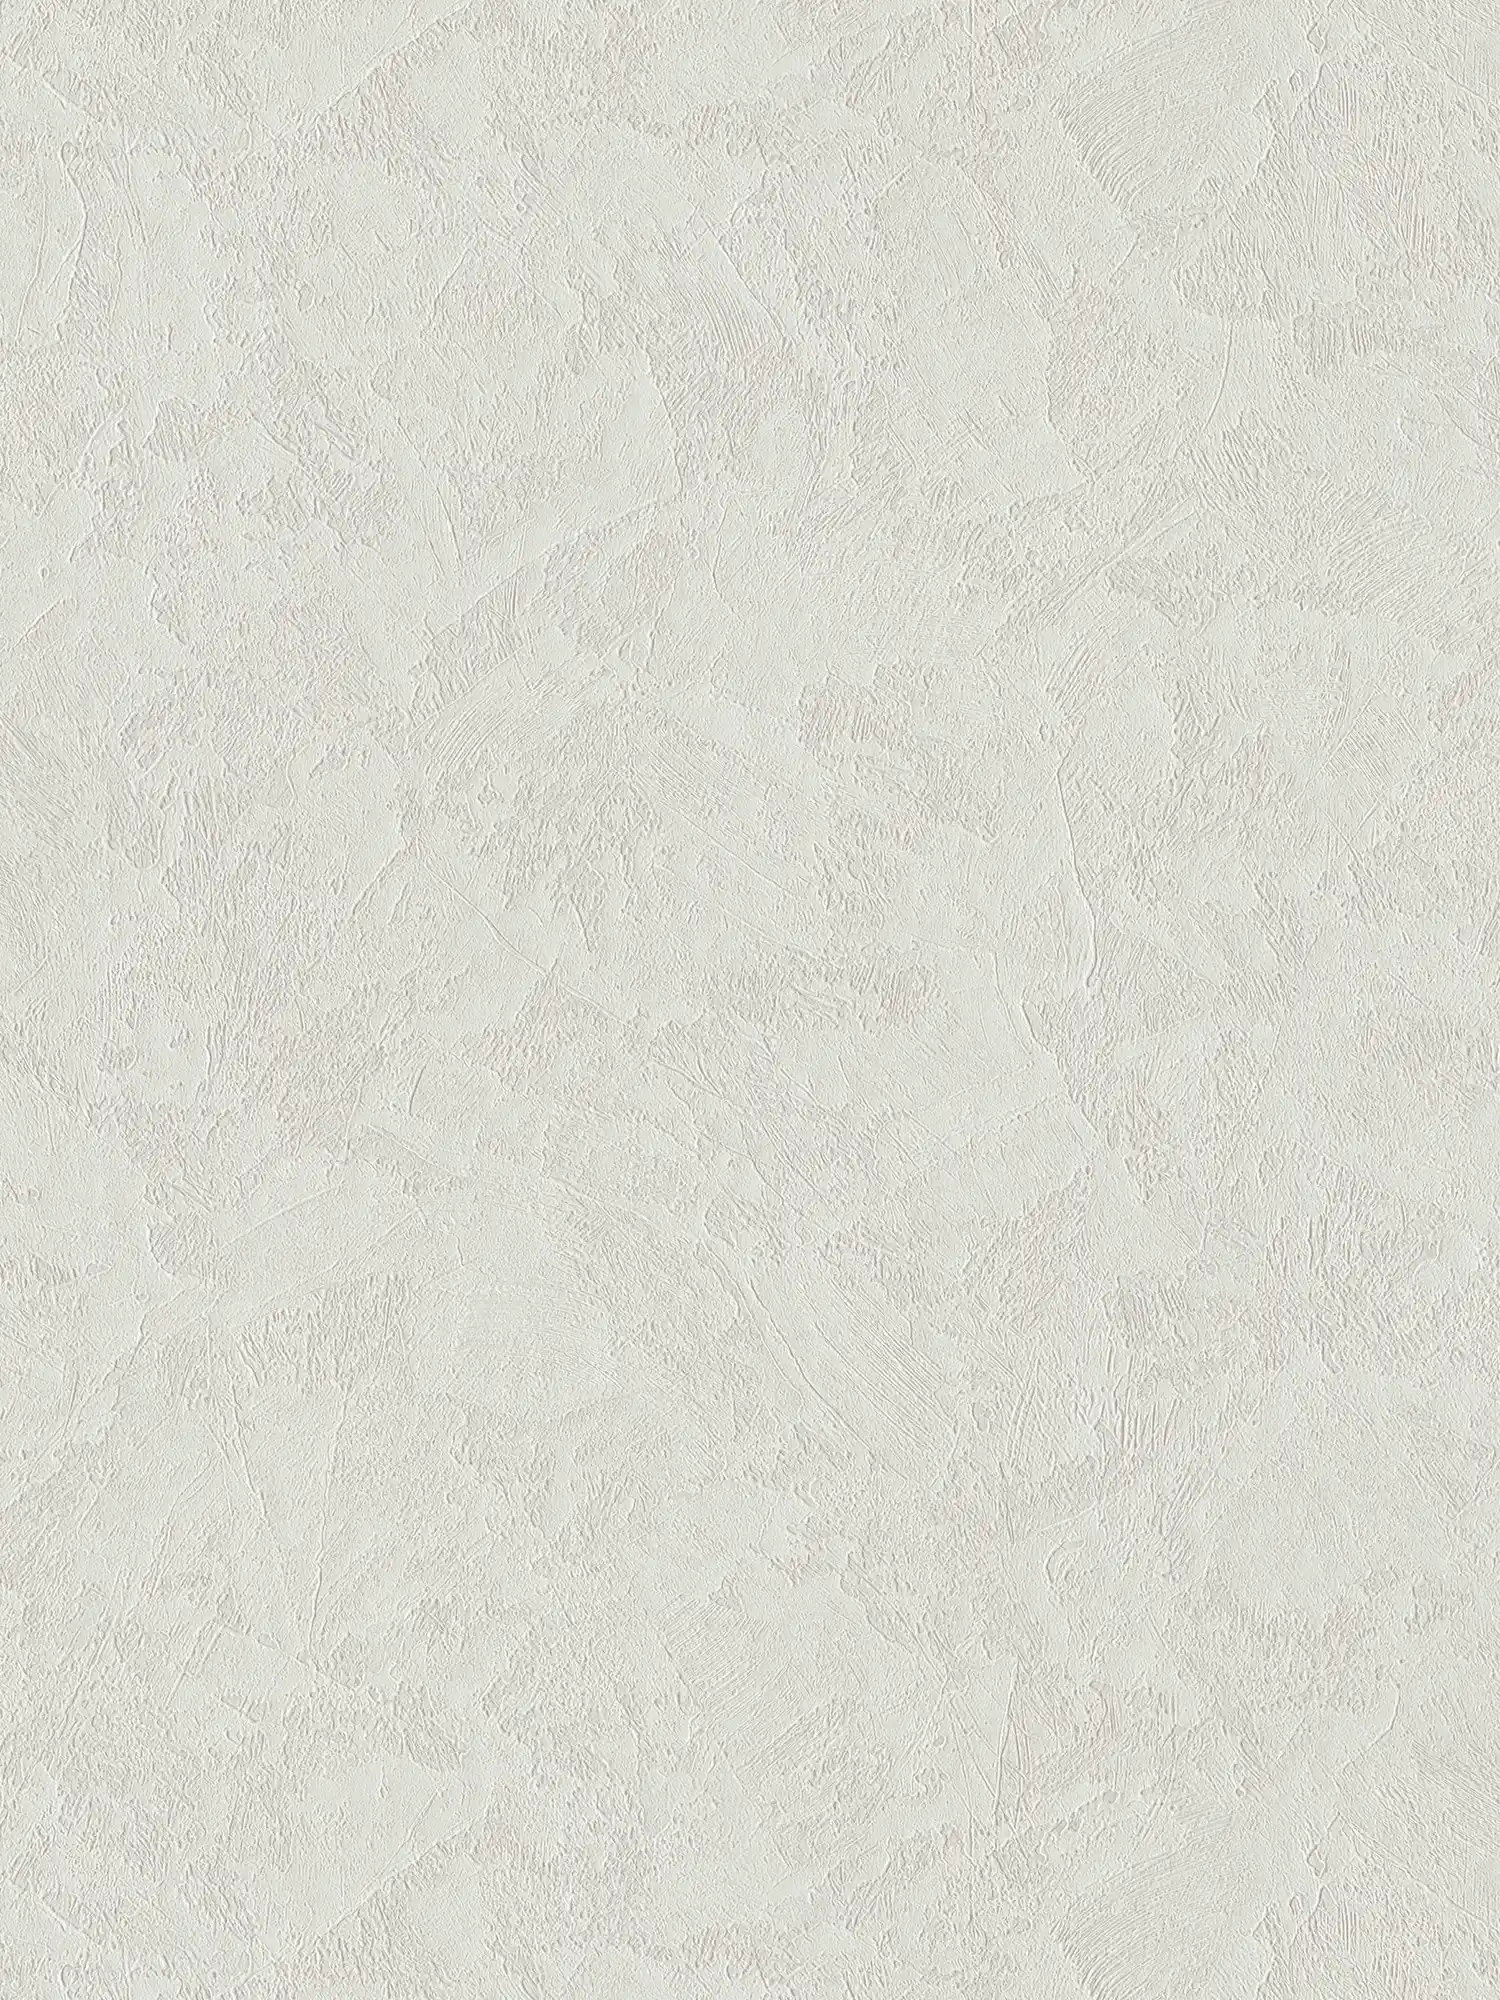 Wallpaper plain with structure and glitter effect in plaster look - light grey
